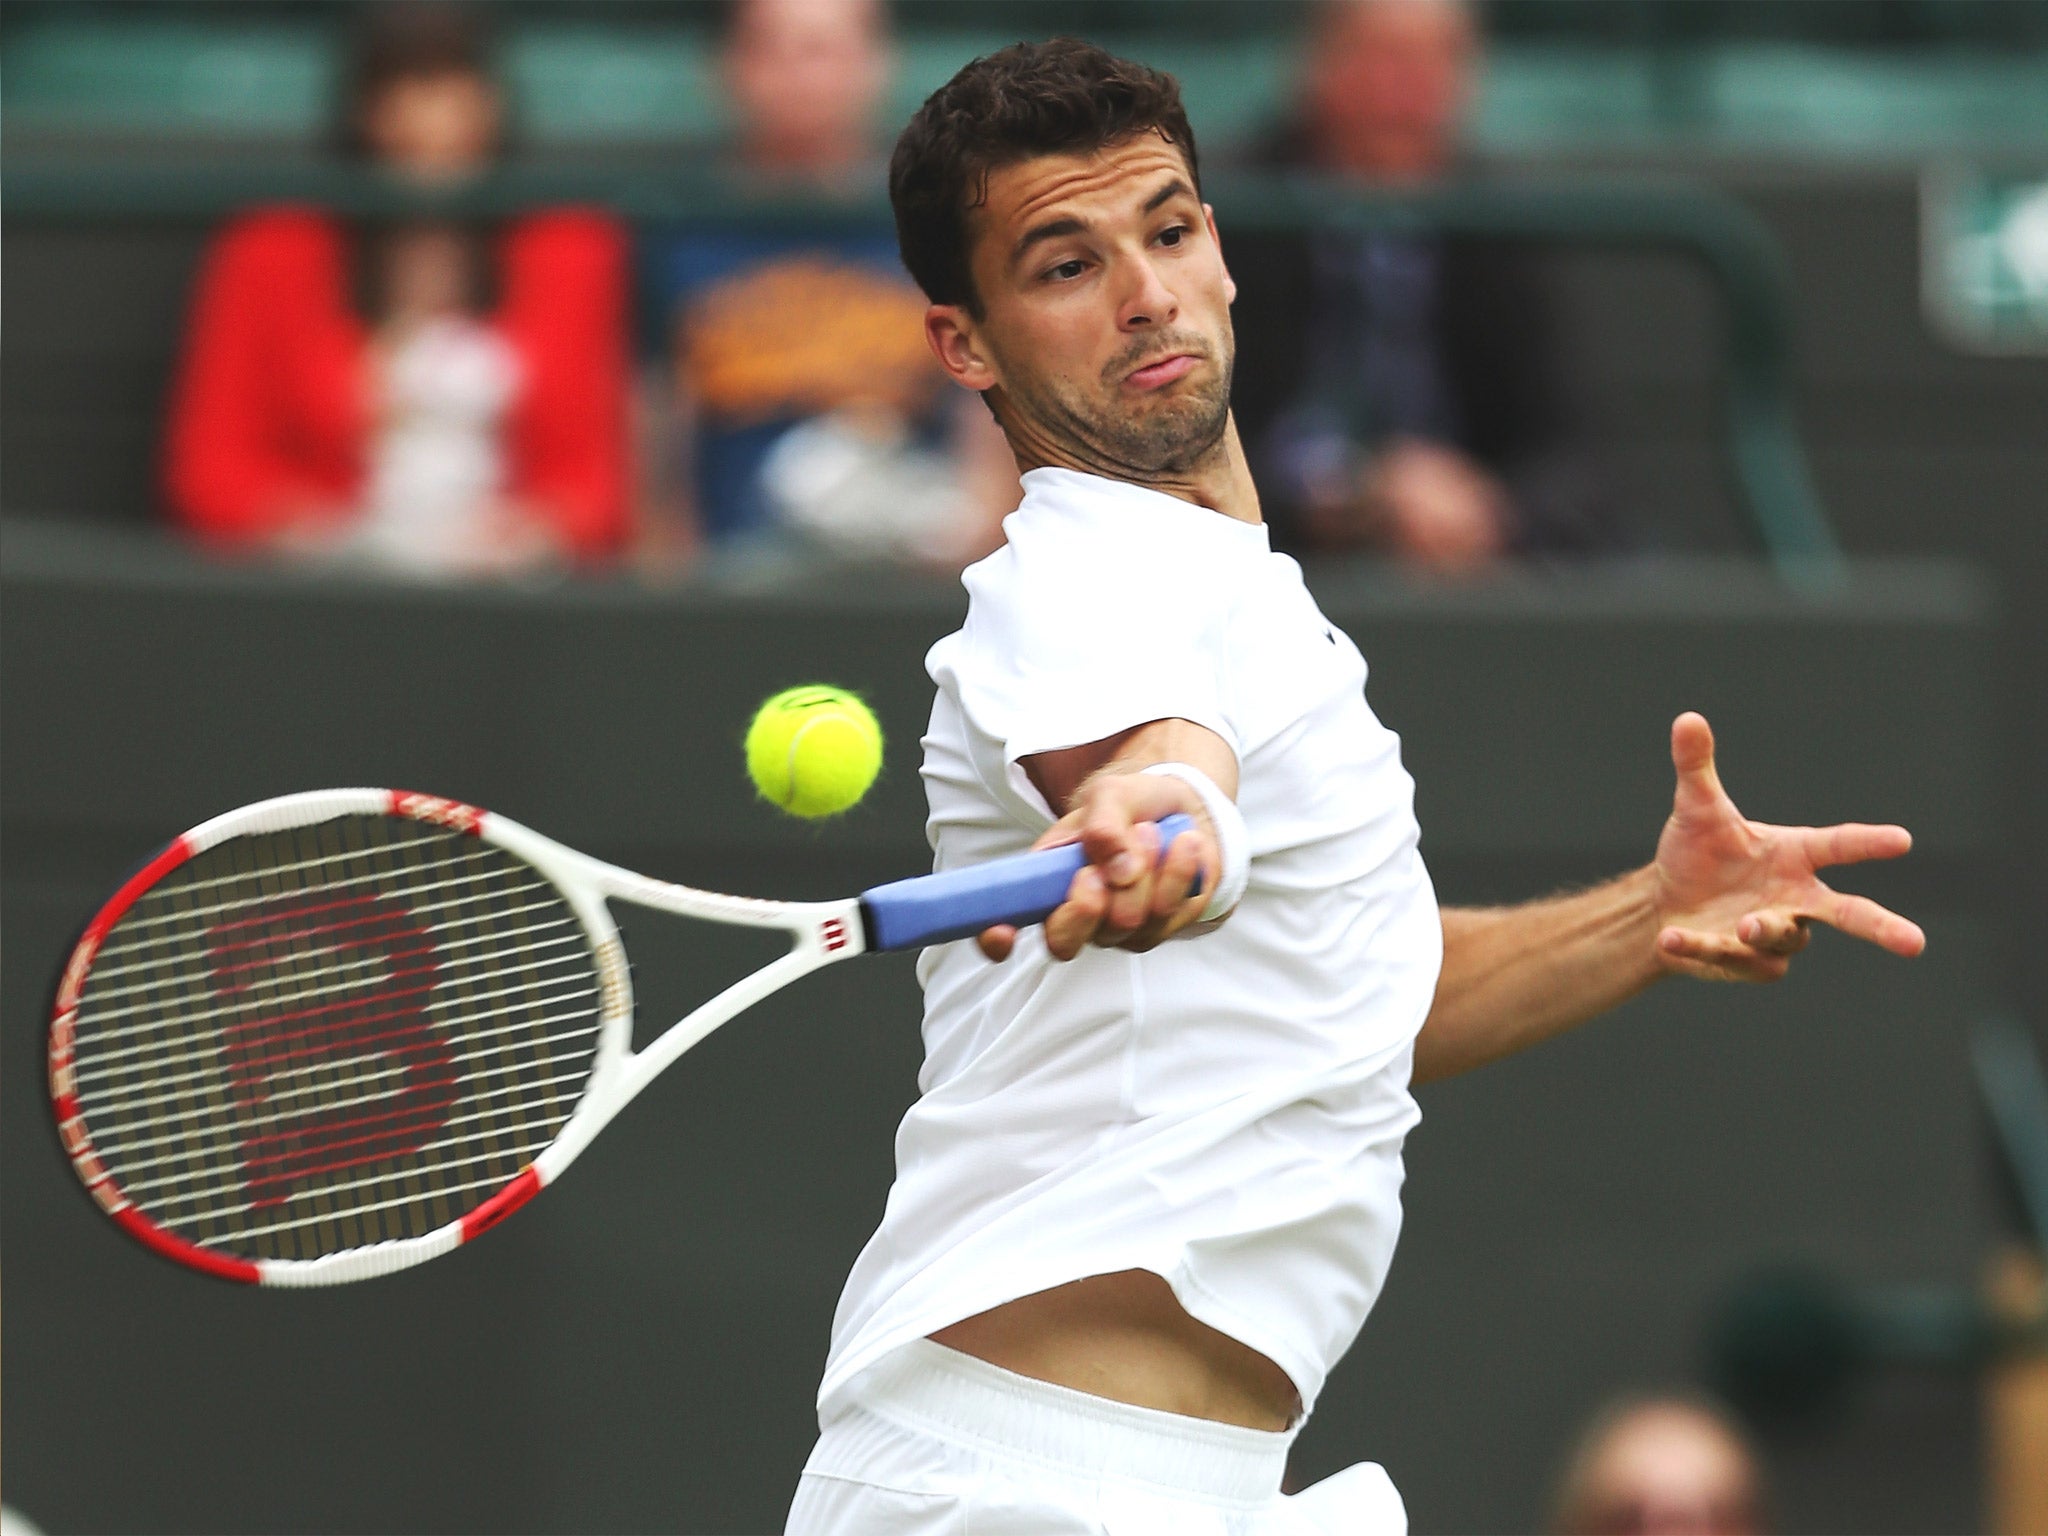 Grigor Dimitrov’s talent is now being matched by his results